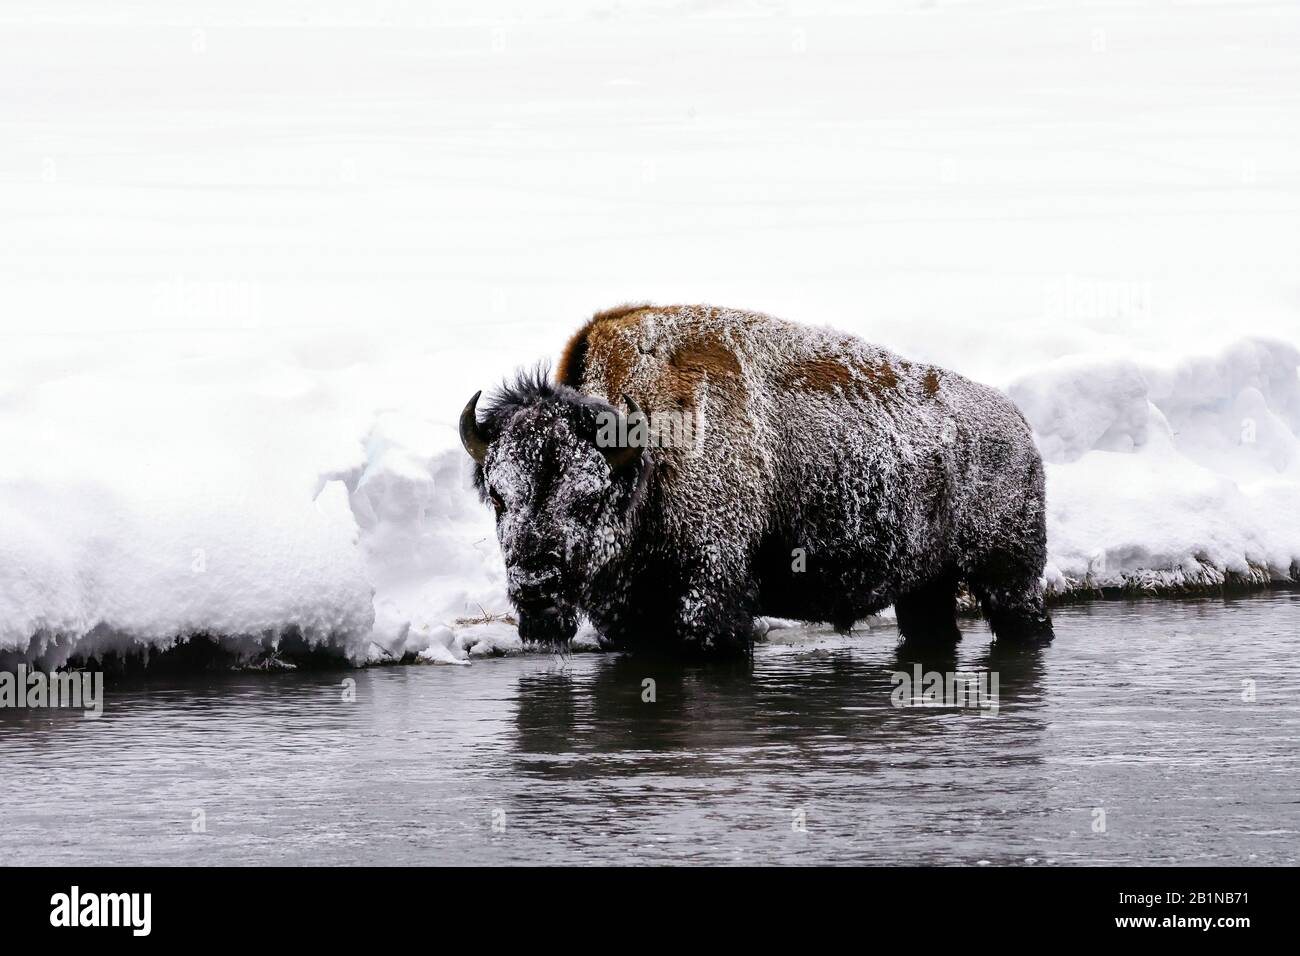 American bison, buffalo (Bison bison), standing in shallow water in freezing cold, side view, USA, Wyoming, Yellowstone National Park Stock Photo